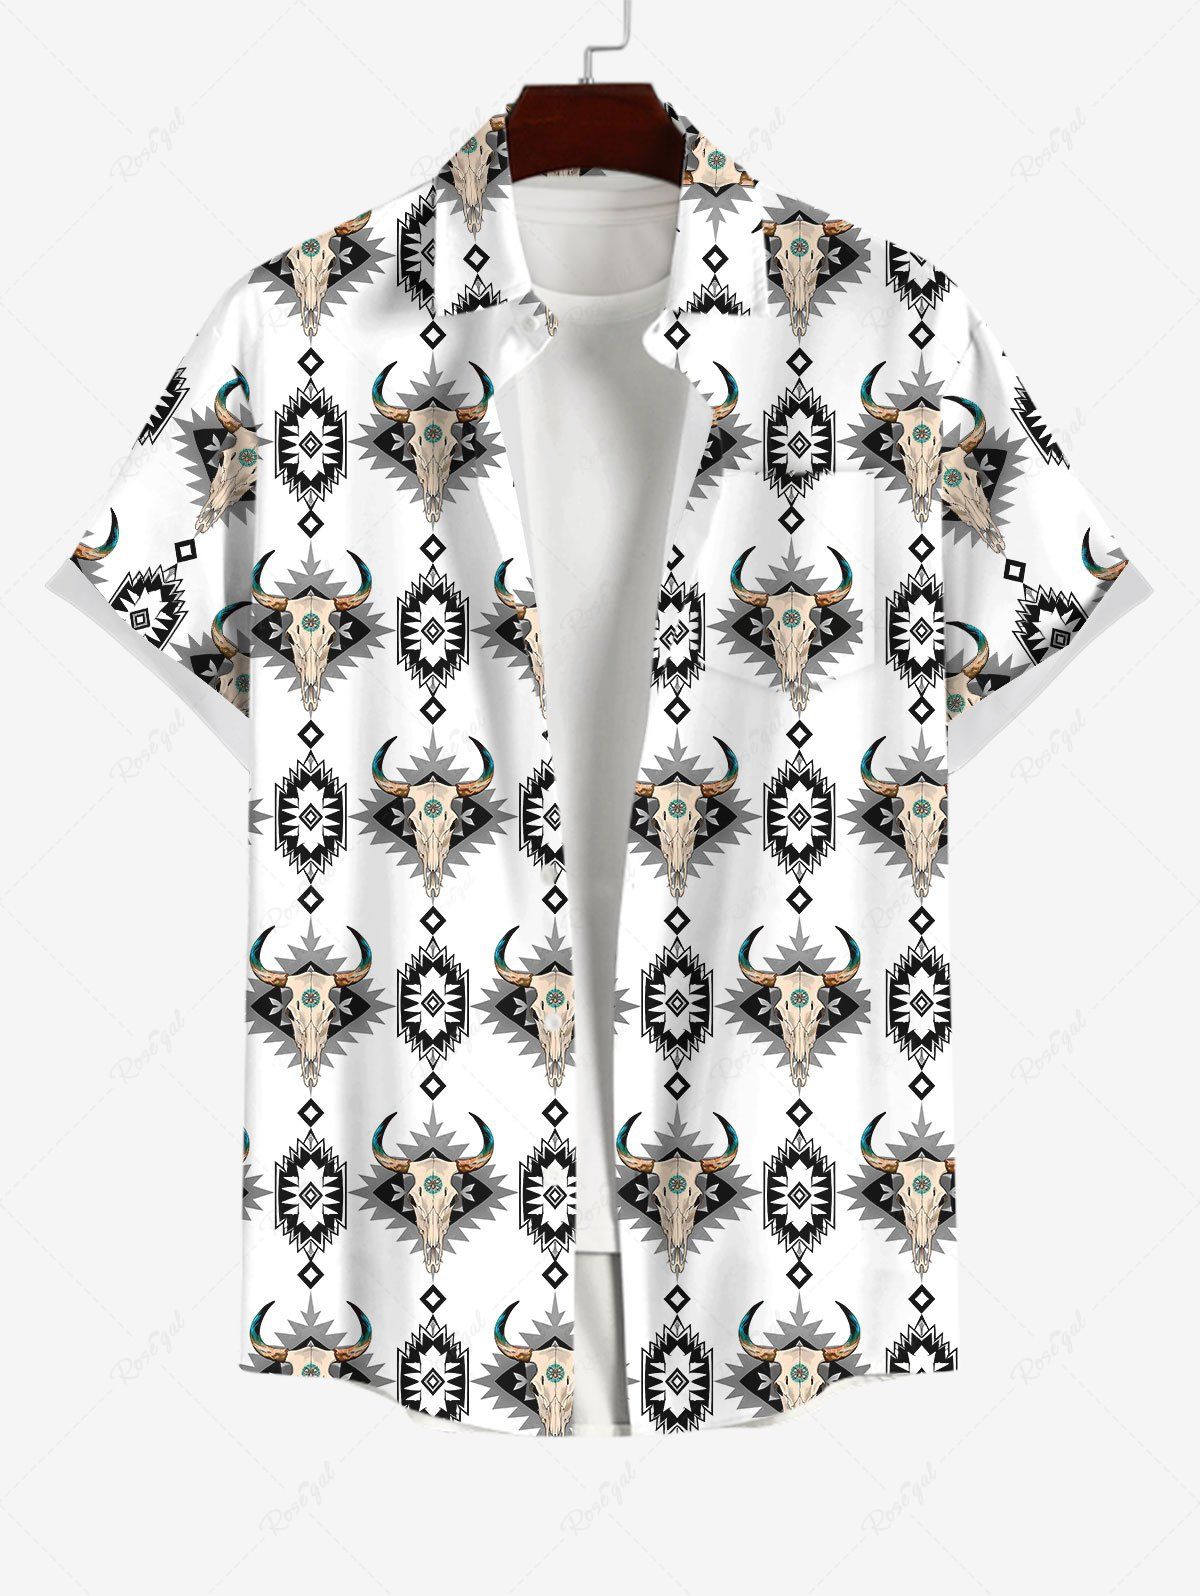 Discount Men's Turn-down Collar Cow Head Ethnic Graphic Print Full Buttons Pocket Shirt  